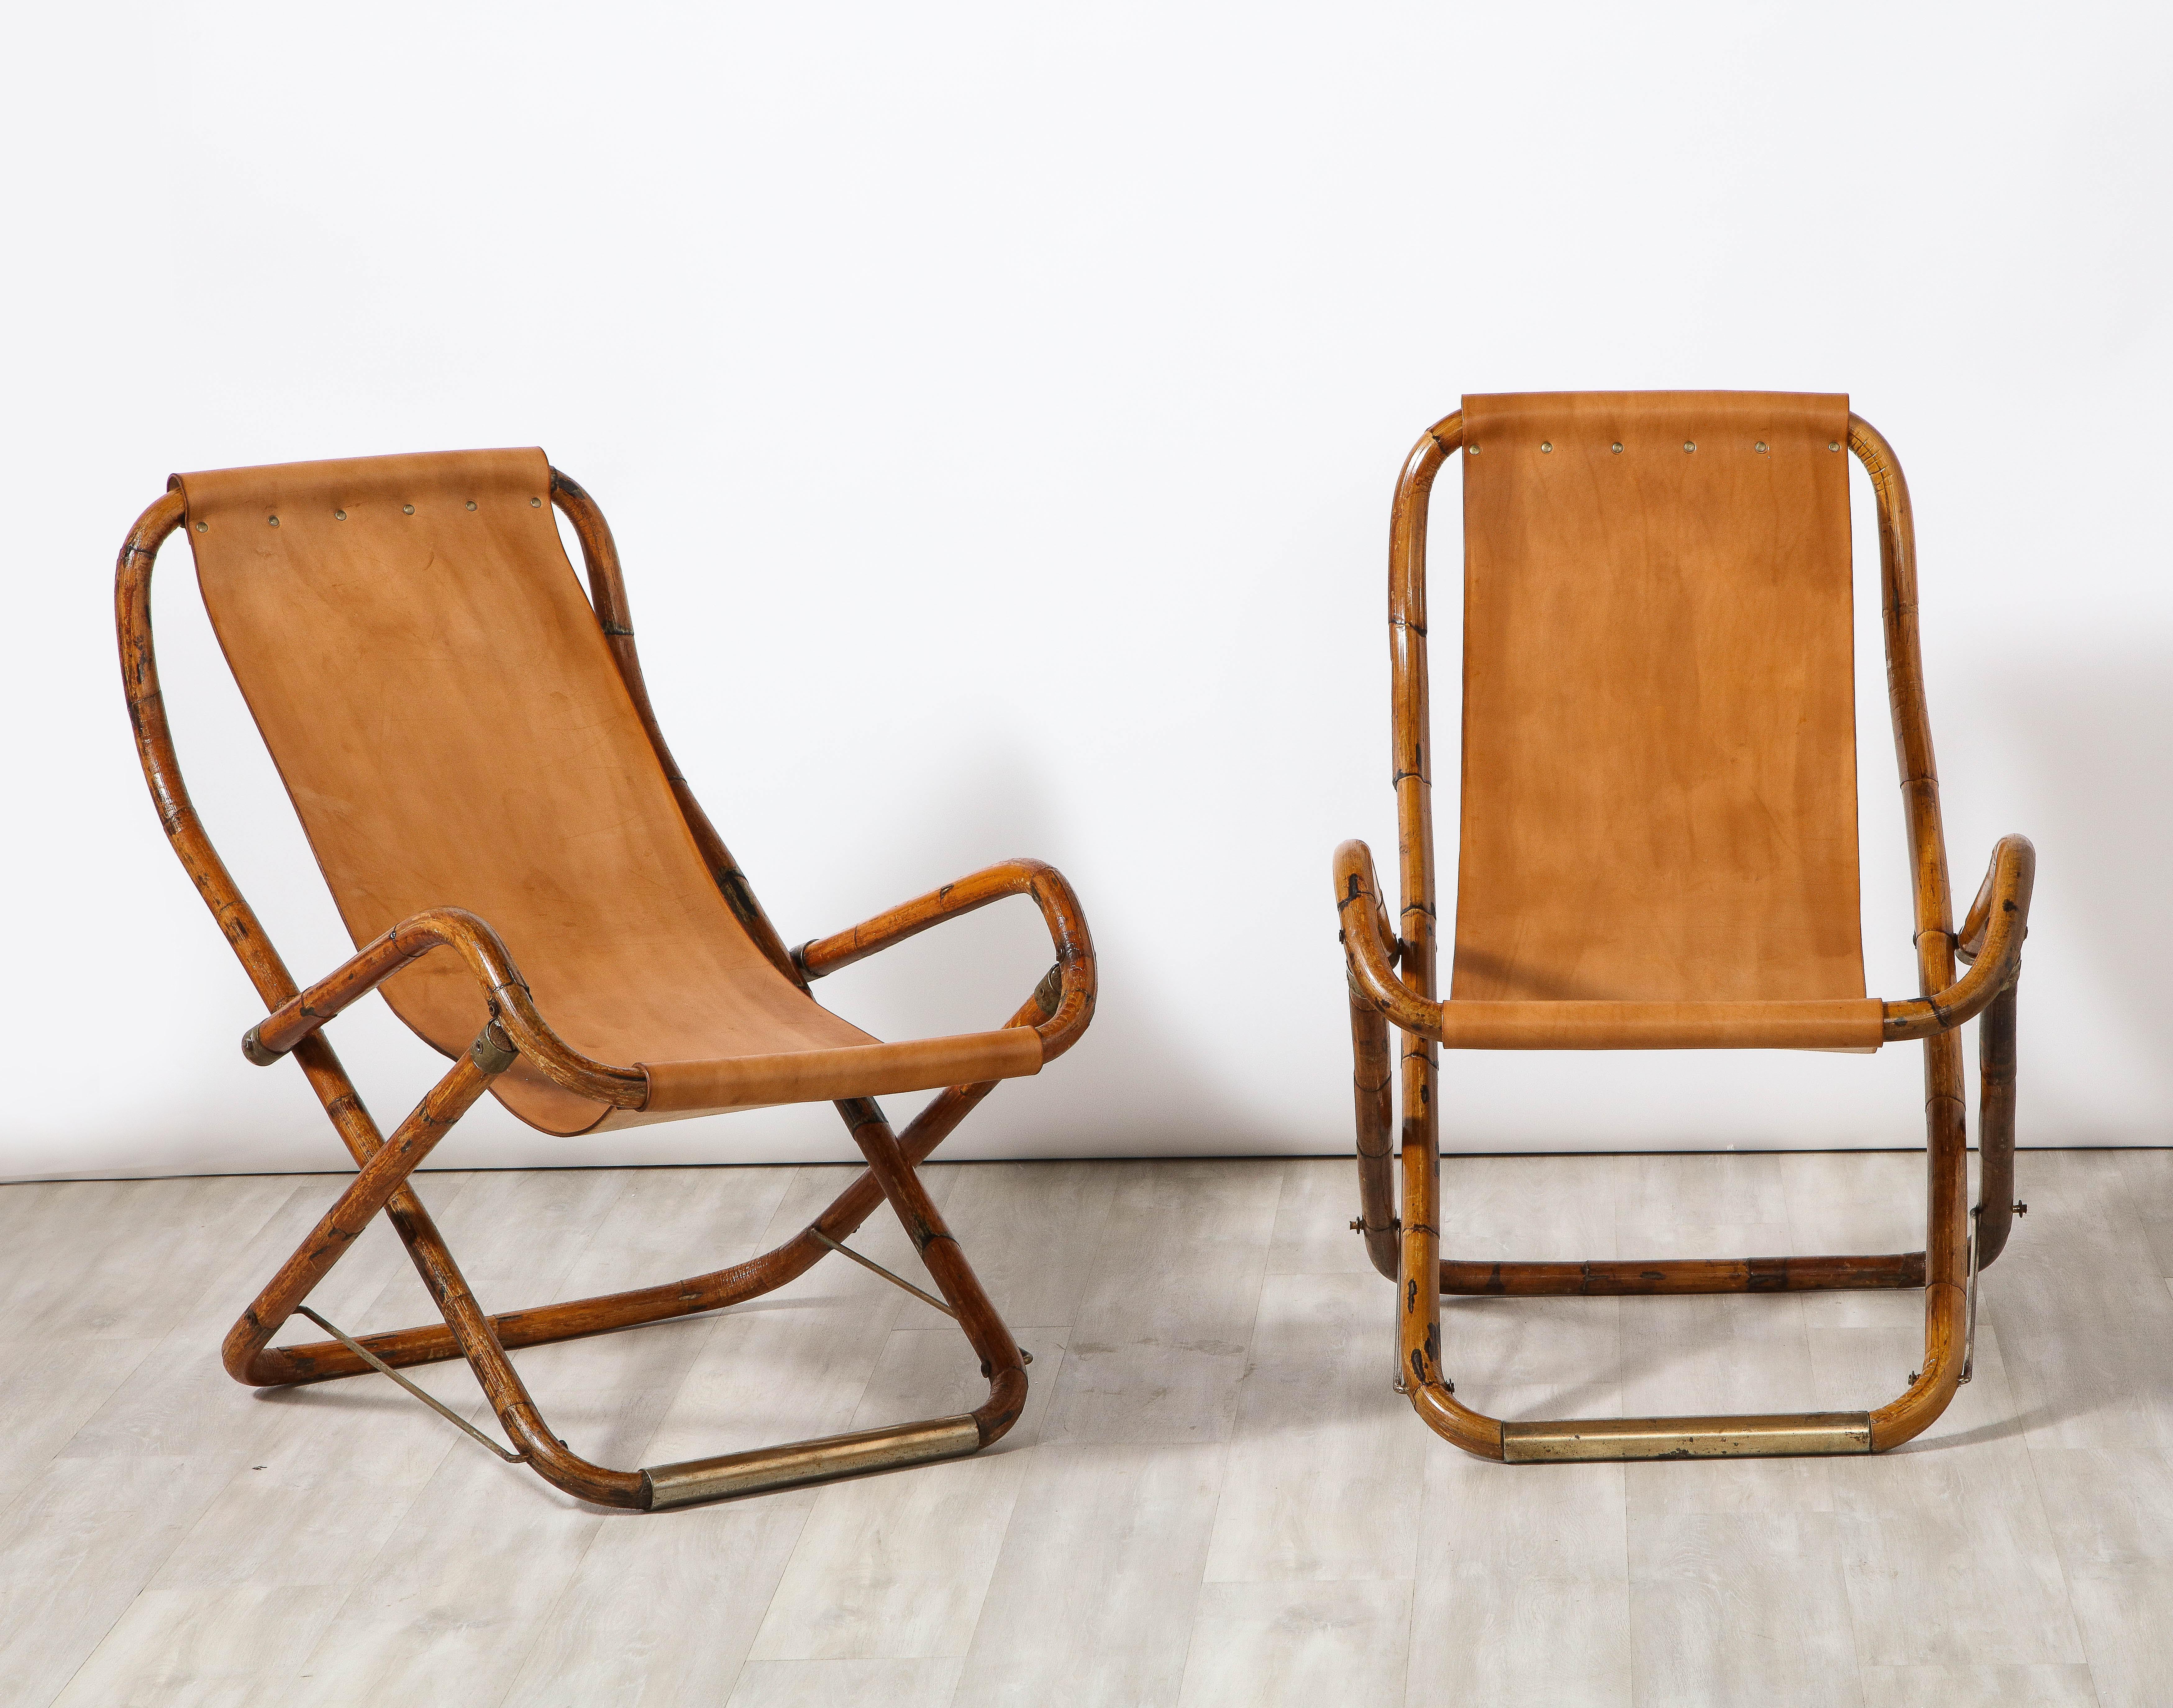 Gianfranco Frattini for Bernini pair of Italian folding campaign chairs, comprised of bamboo with brass stretchers and detailing and caramel leather sling seats. (The chairs fold with leather straps). Chic addition to the city or country! 
Designed